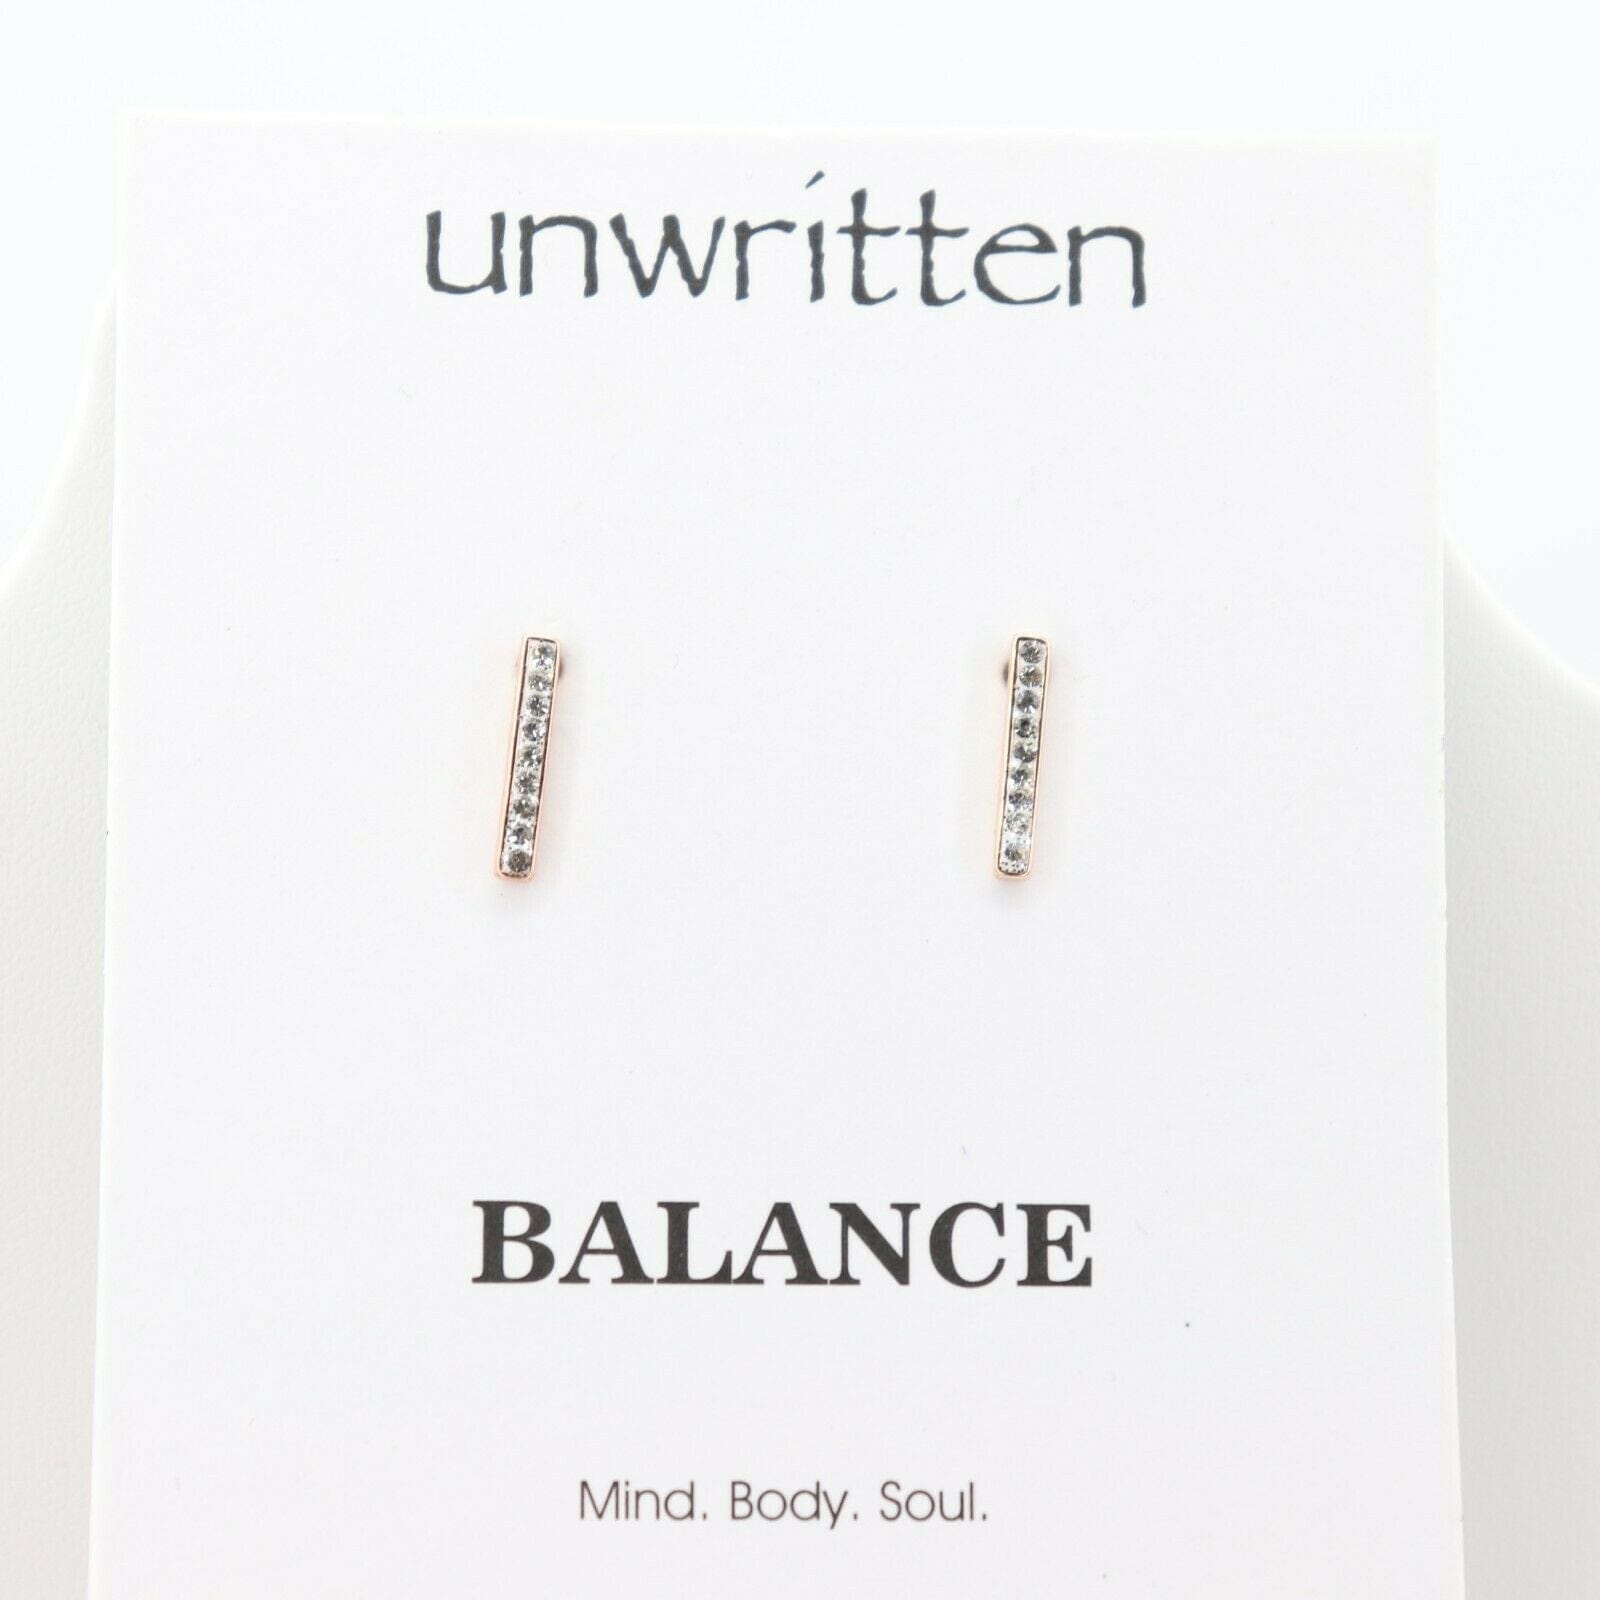 Unwritten "Balance" Bar Earrings CZ - The Pink Pigs, A Compassionate Boutique